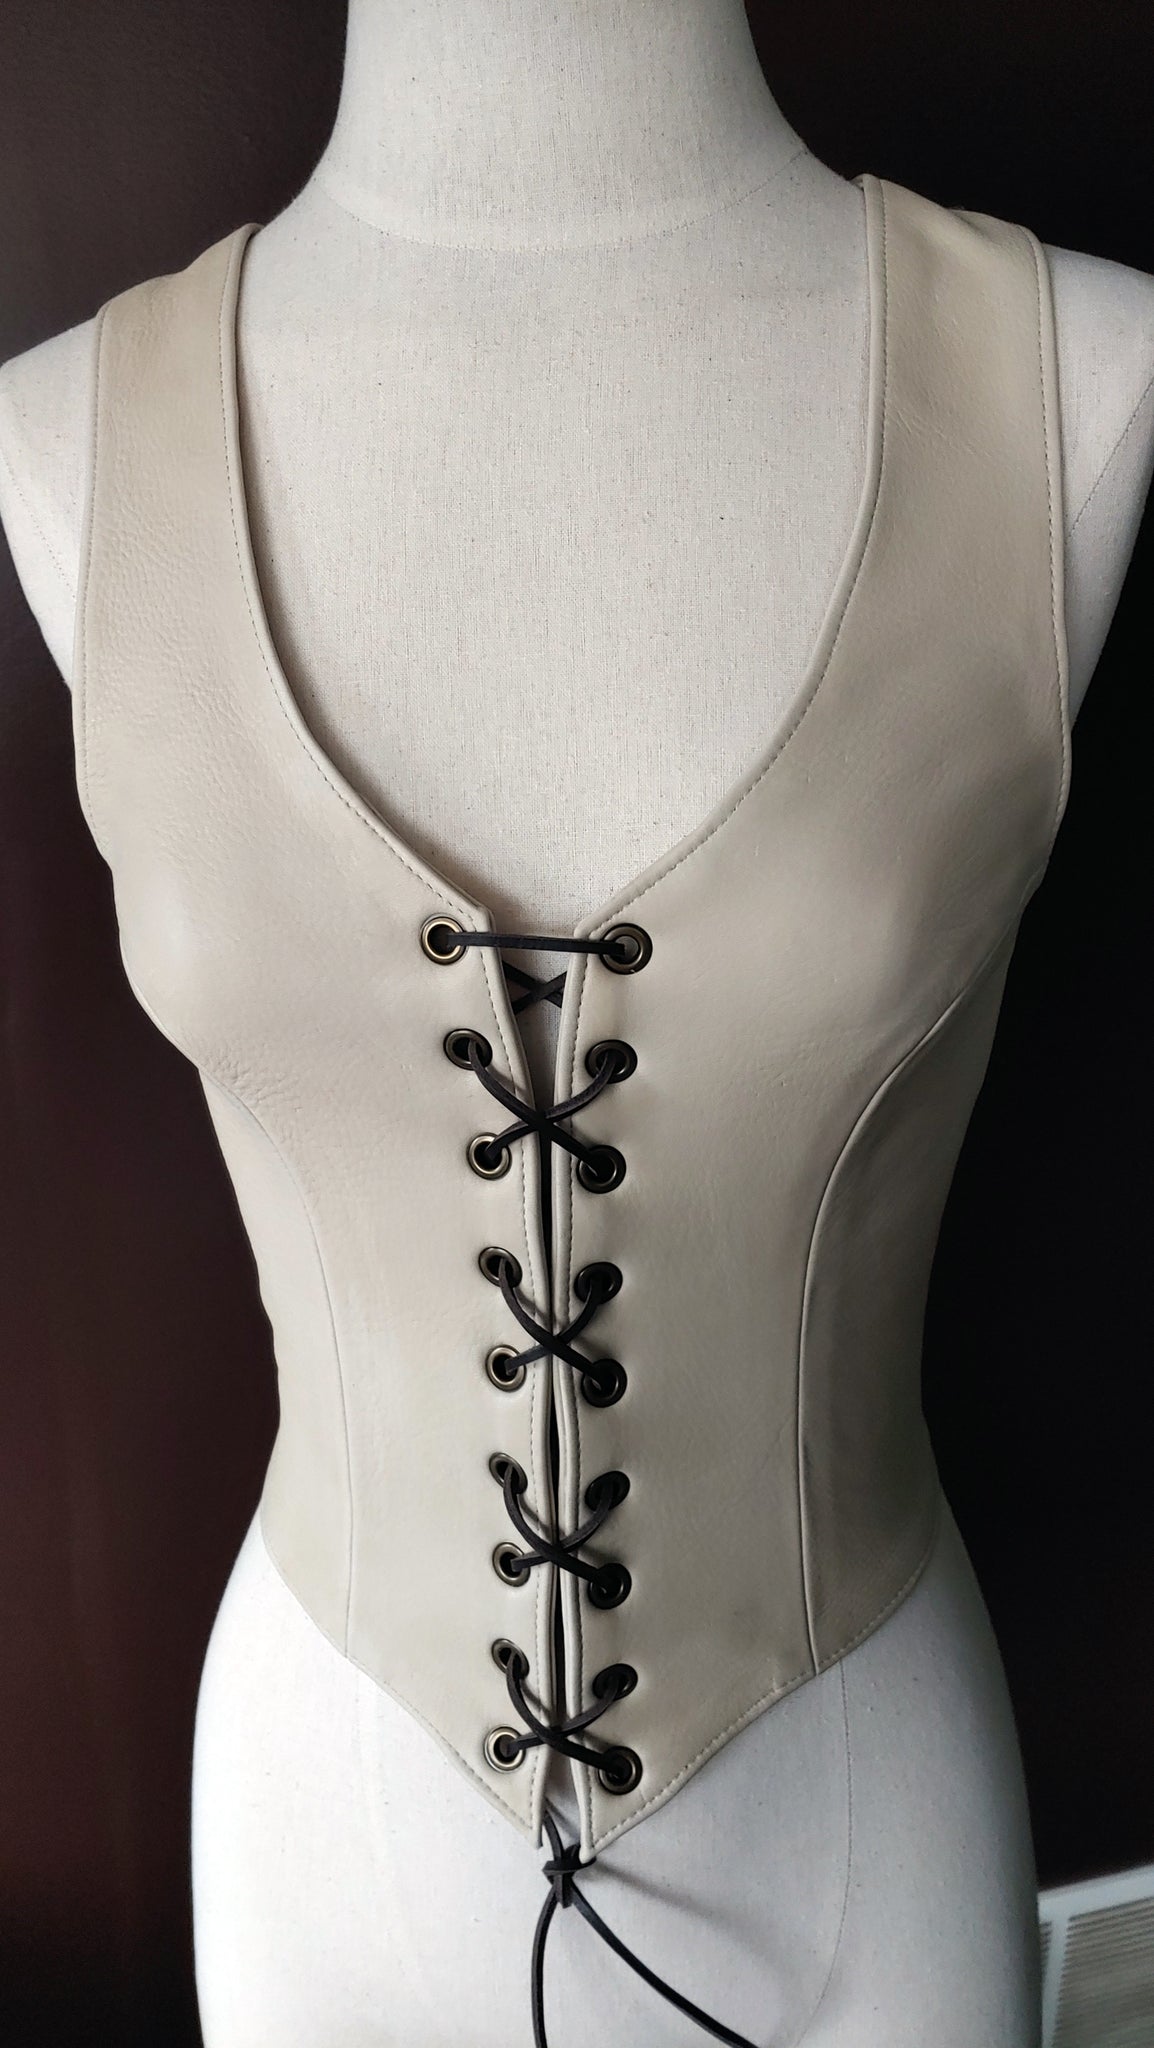 Rebel Leather Halter Top | Vest Style, Lace Up, Backless, PLONGE (Cow) Leather Top  - SS1134-PL